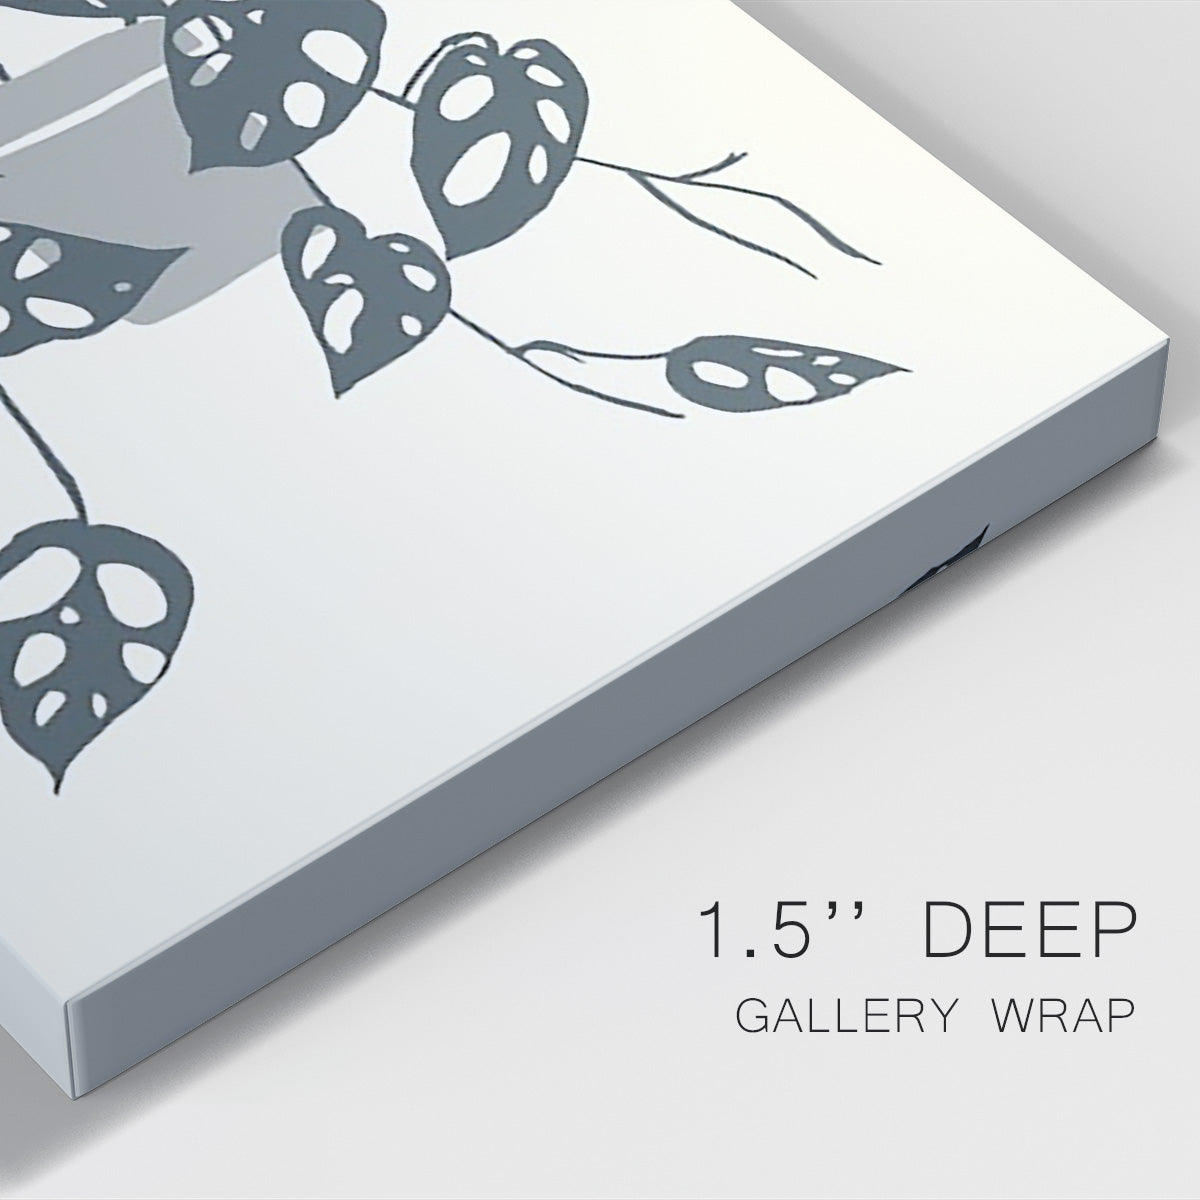 Growing Leaves IV Premium Gallery Wrapped Canvas - Ready to Hang